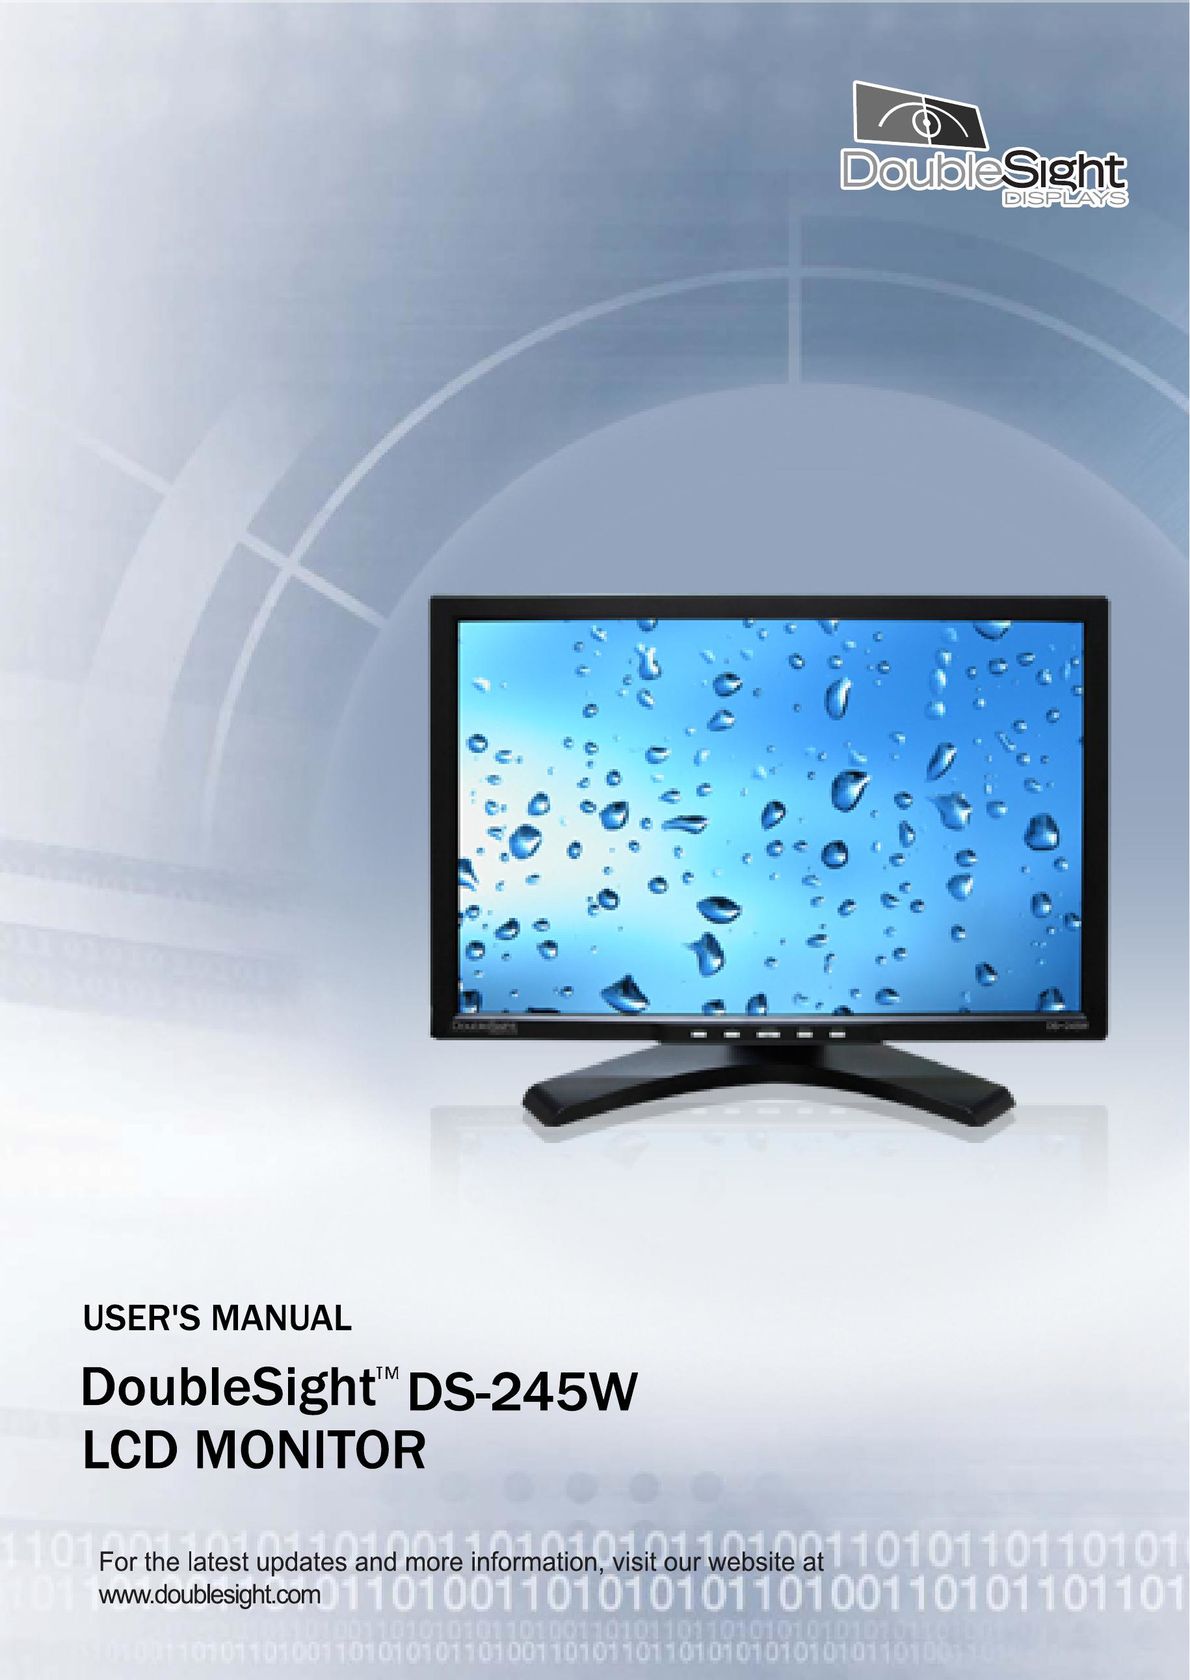 DoubleSight Displays DS-245W Computer Monitor User Manual